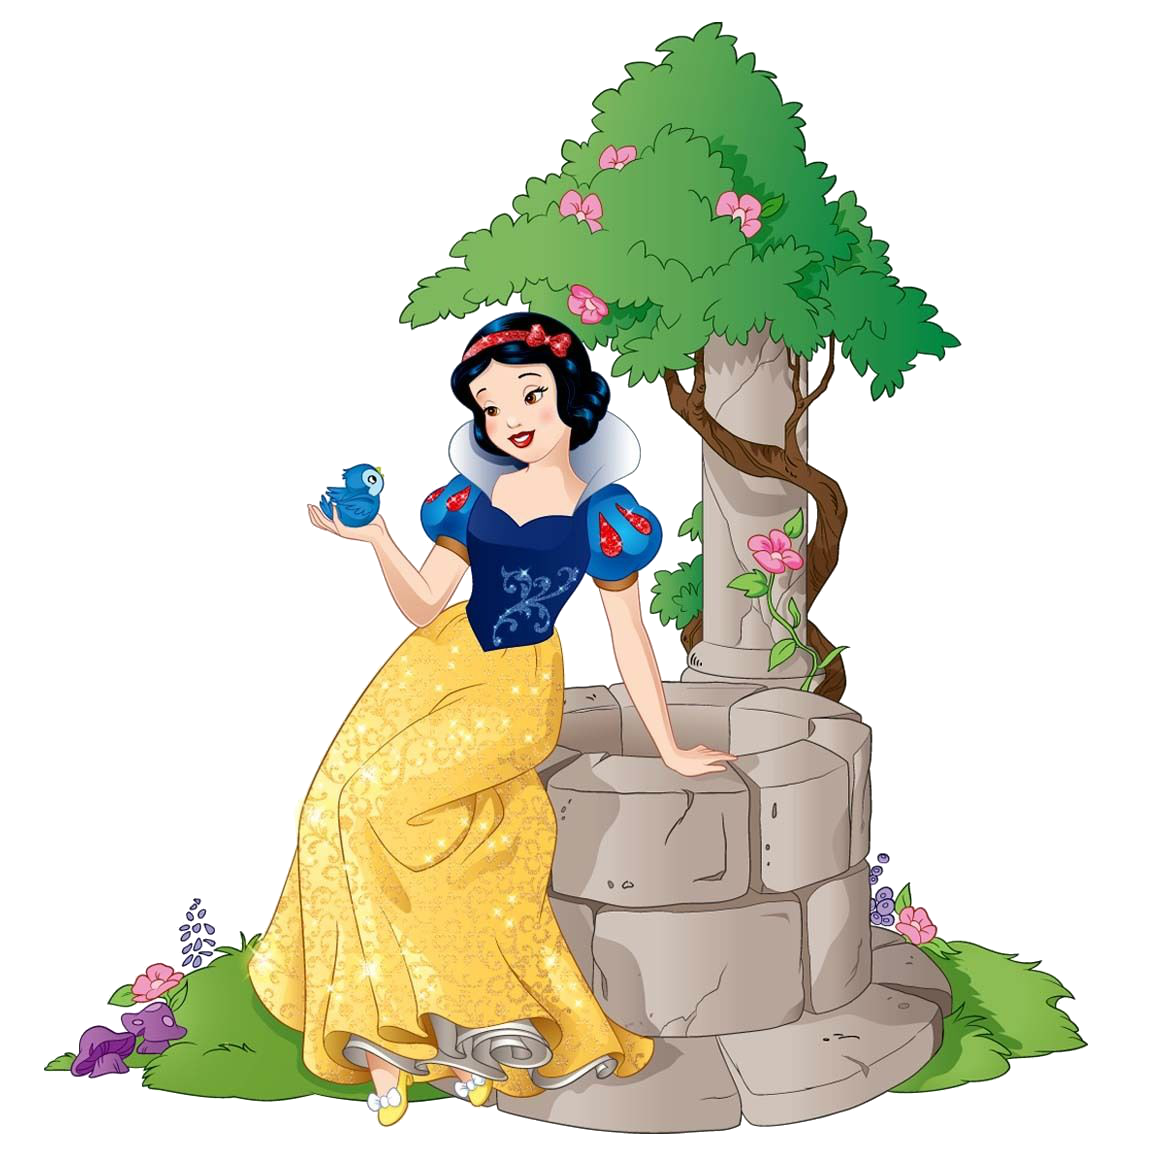 Snow white character gallery. Halo clipart innocent person